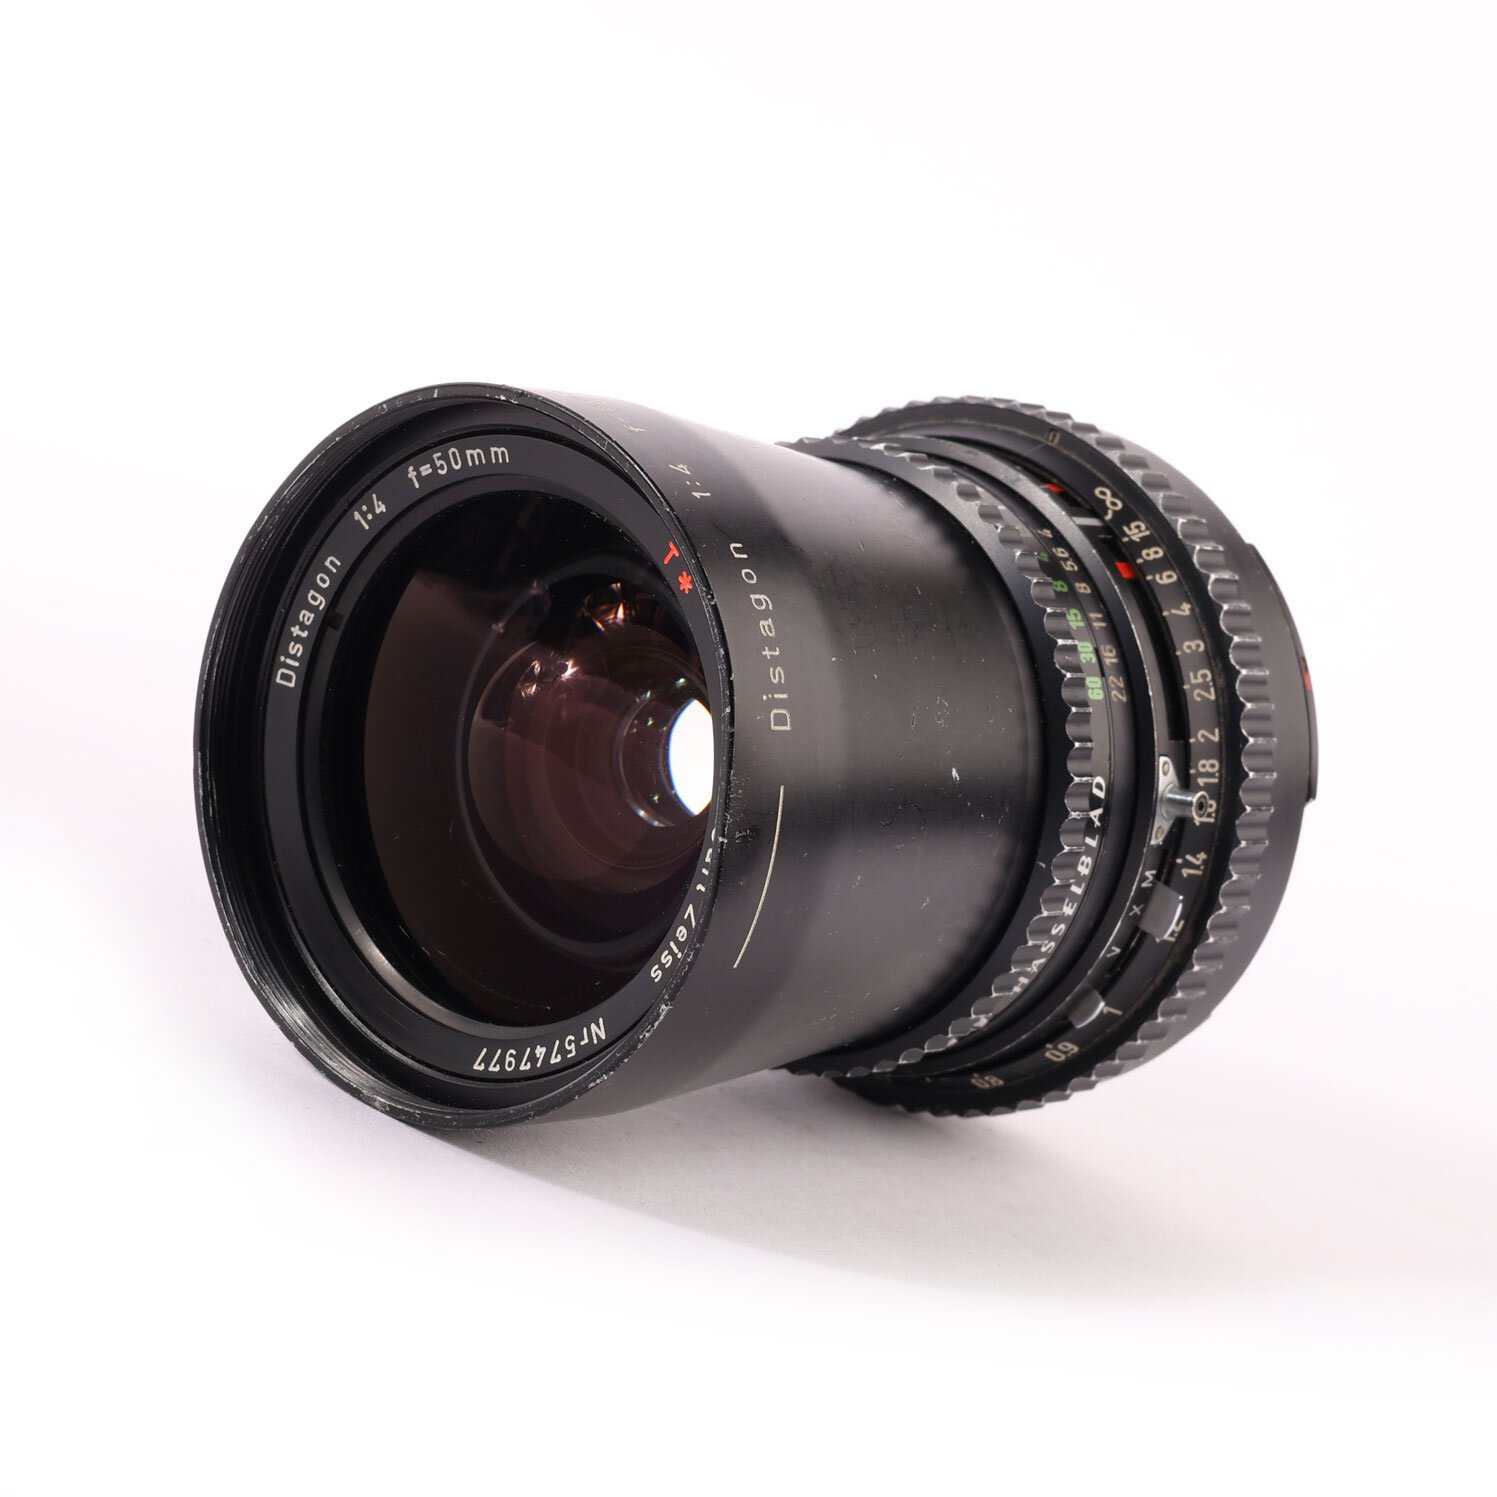 Zeiss Distagon 4/50mm Hasselblad V